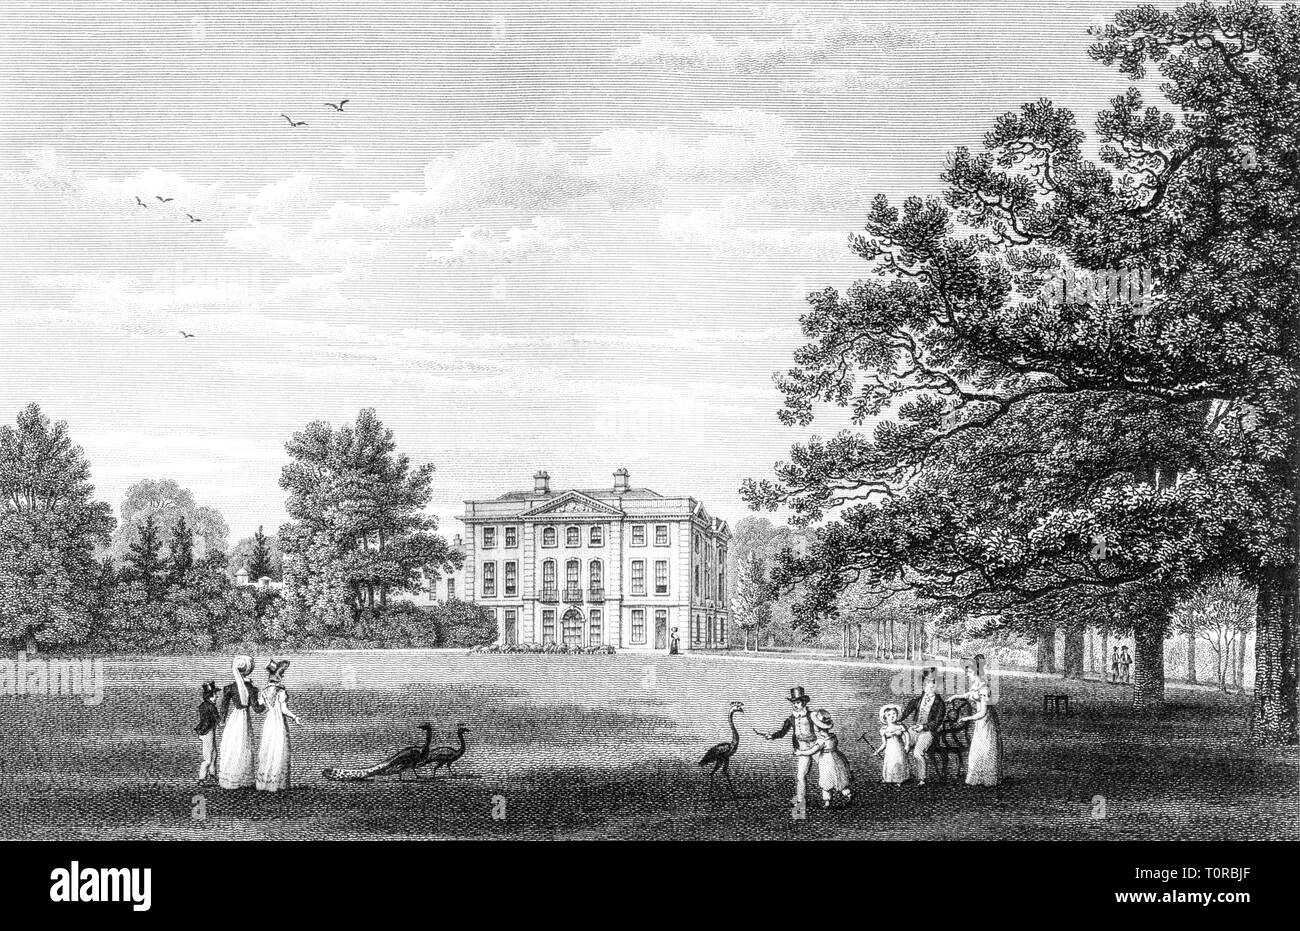 An engraving of Cleve Hill House, Downend, Bristol UK scanned at high resolution from a book published in 1825. Believed copyright free. Stock Photo